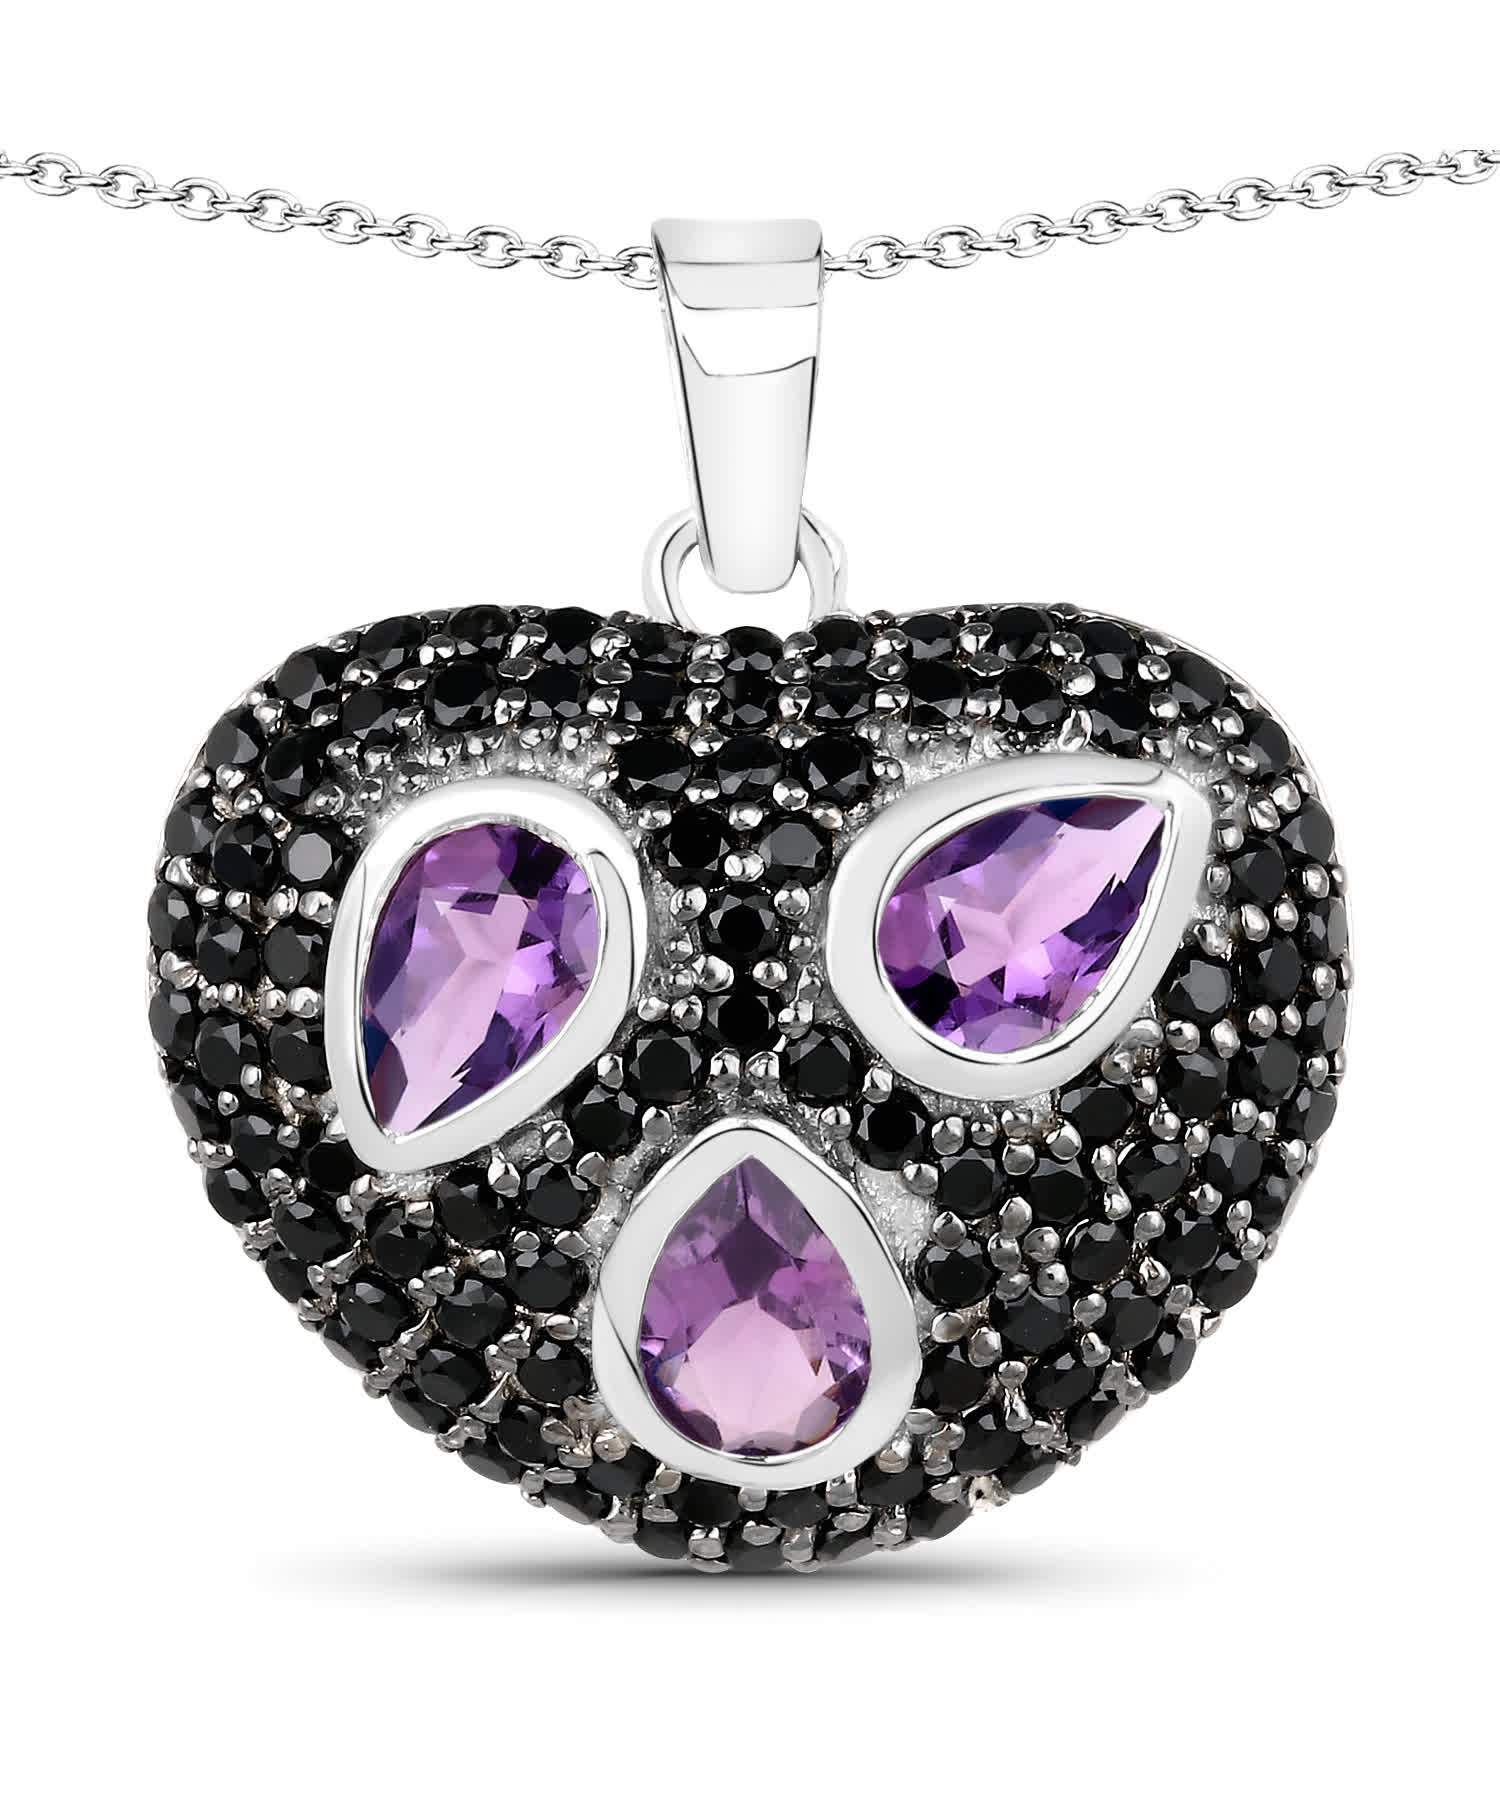 3.00ctw Natural Amethyst and Black Spinel Rhodium Plated 925 Sterling Silver Heart Pendant With Chain View 1